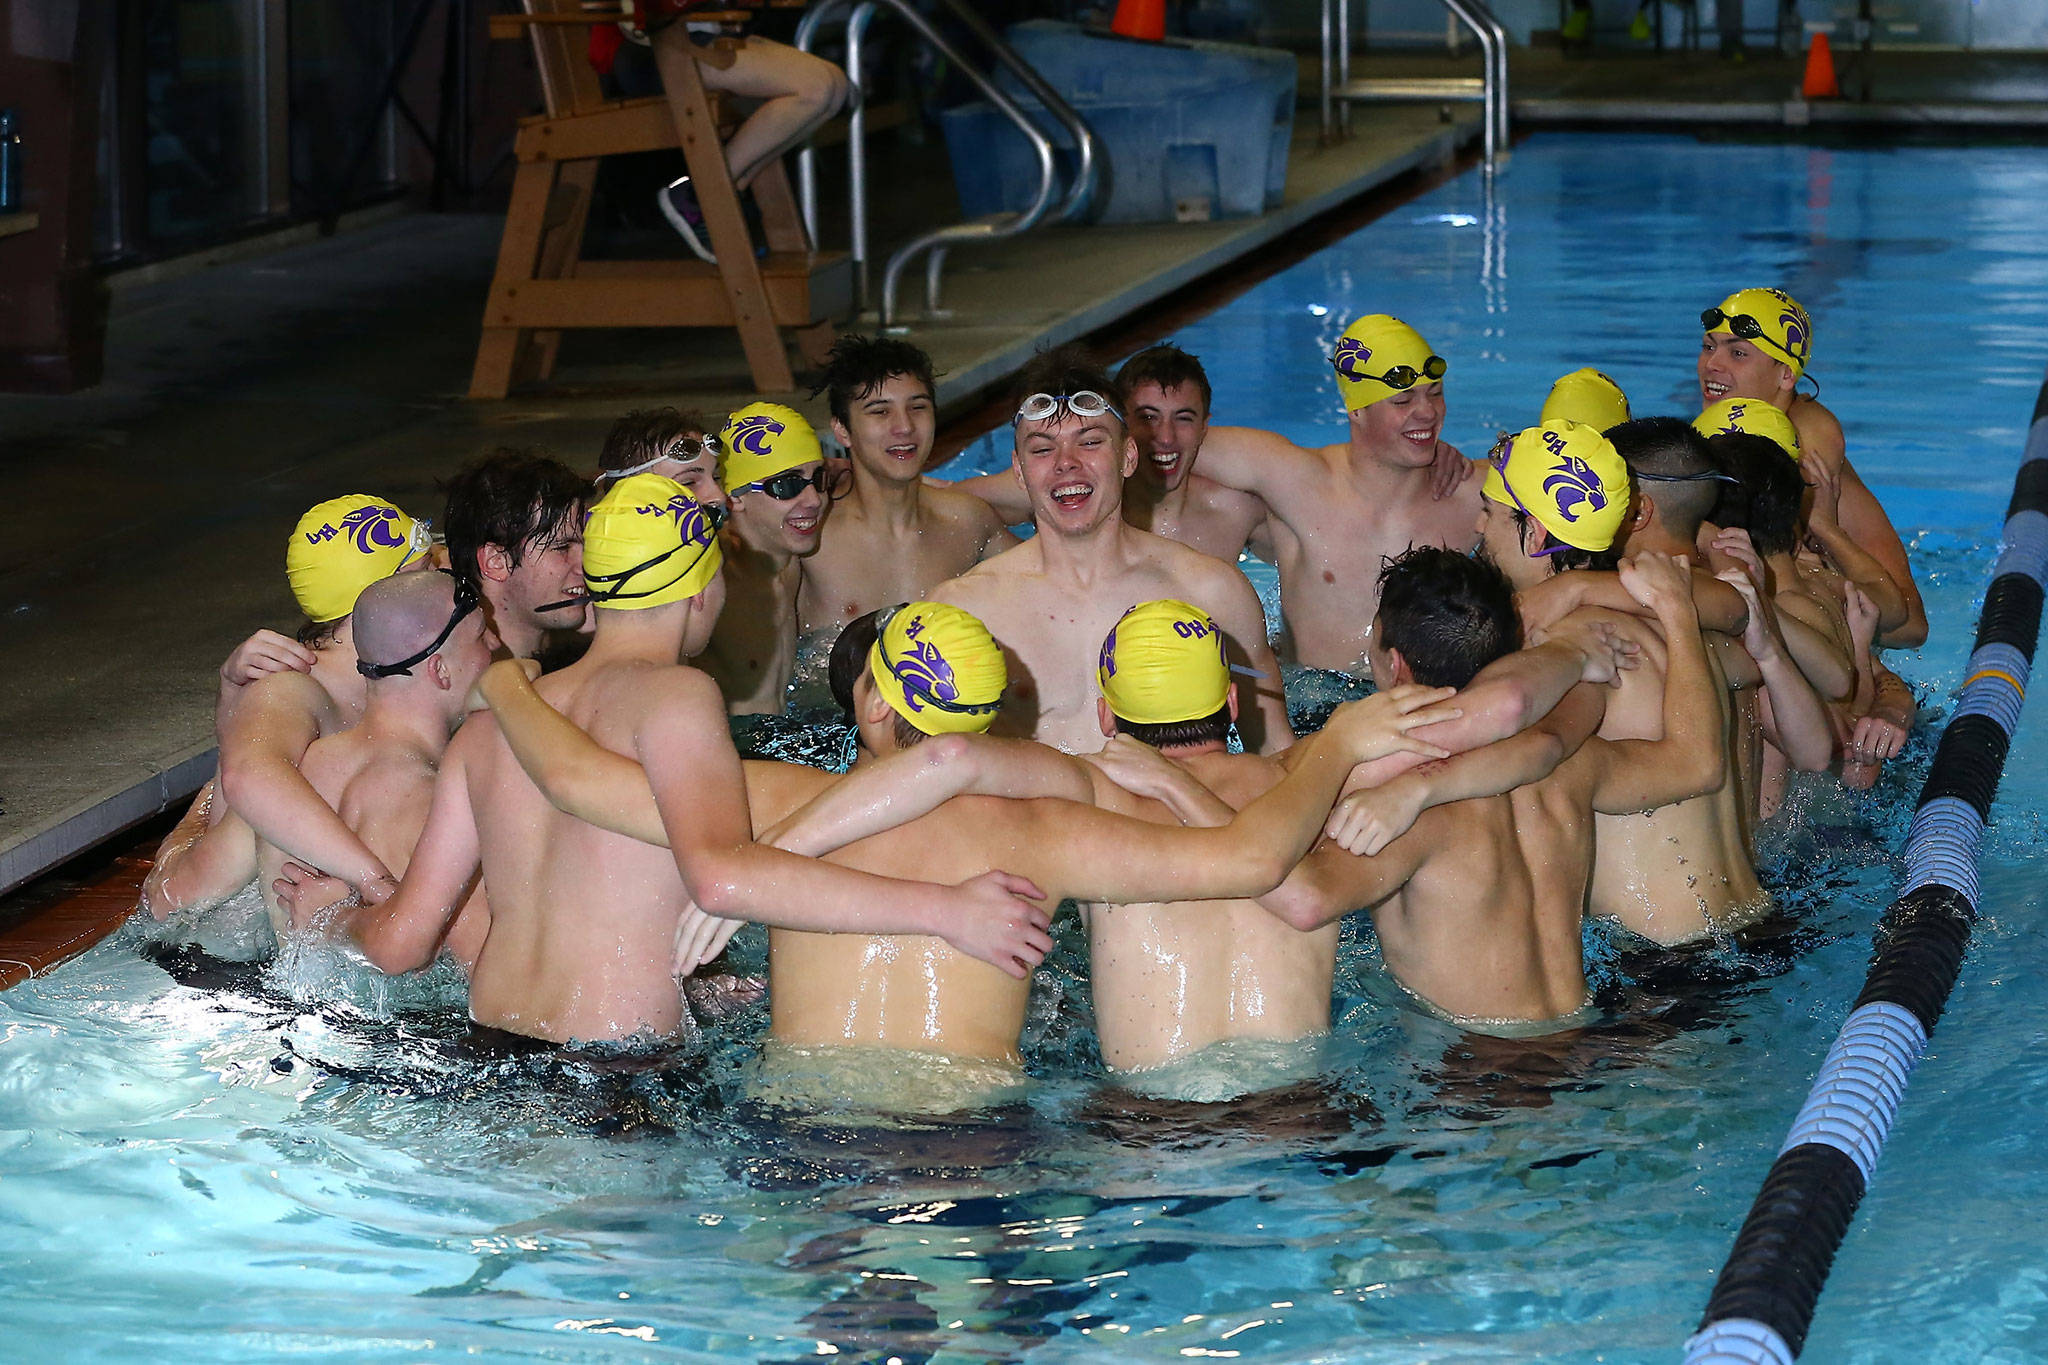 The Oak Harbor High School swim and dive team begins Thursday’s meet with a group cheer. (Photo by John Fisken)